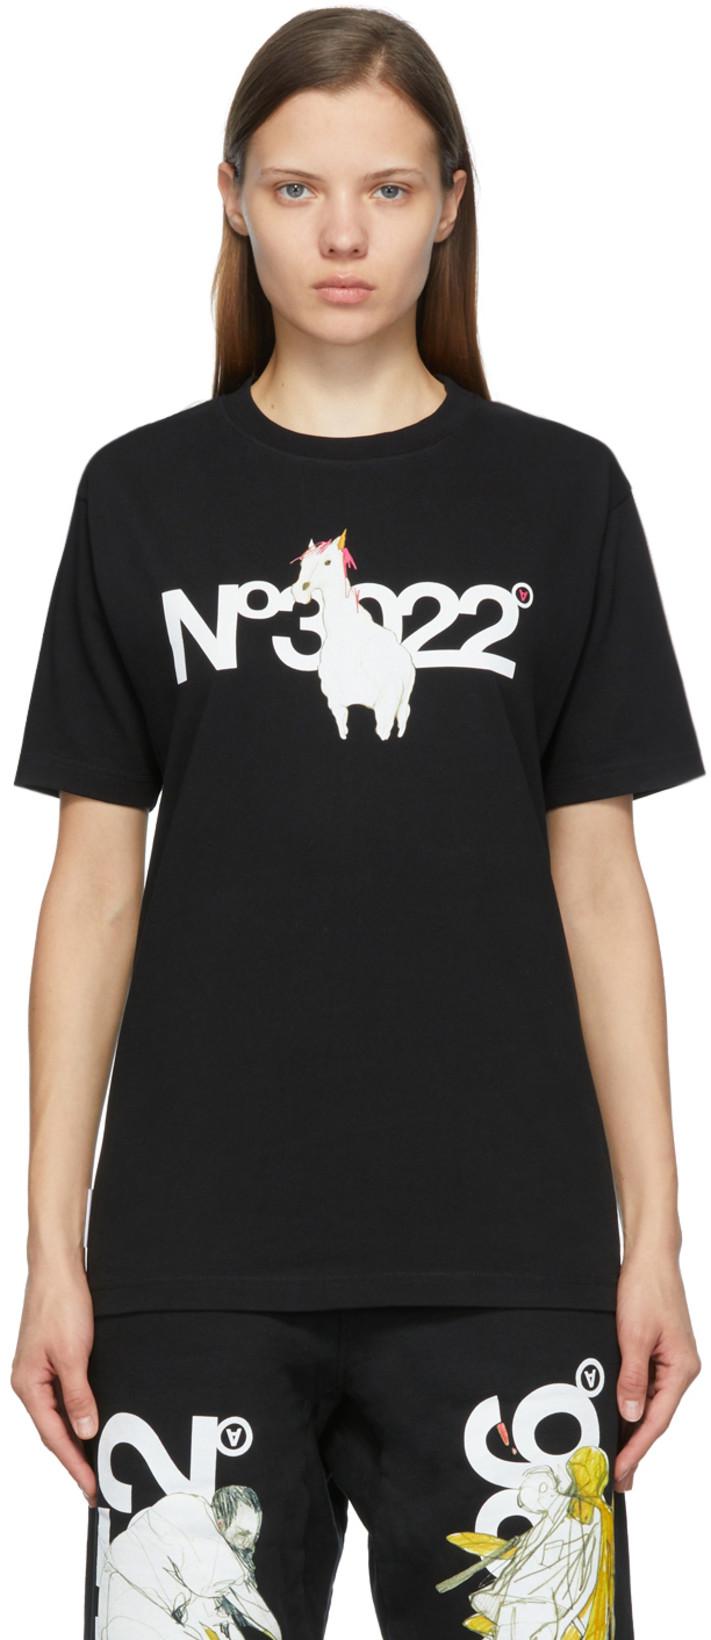 SSENSE Exclusive Black 'N.3022' T-Shirt by AITOR THROUP'S THEDSA